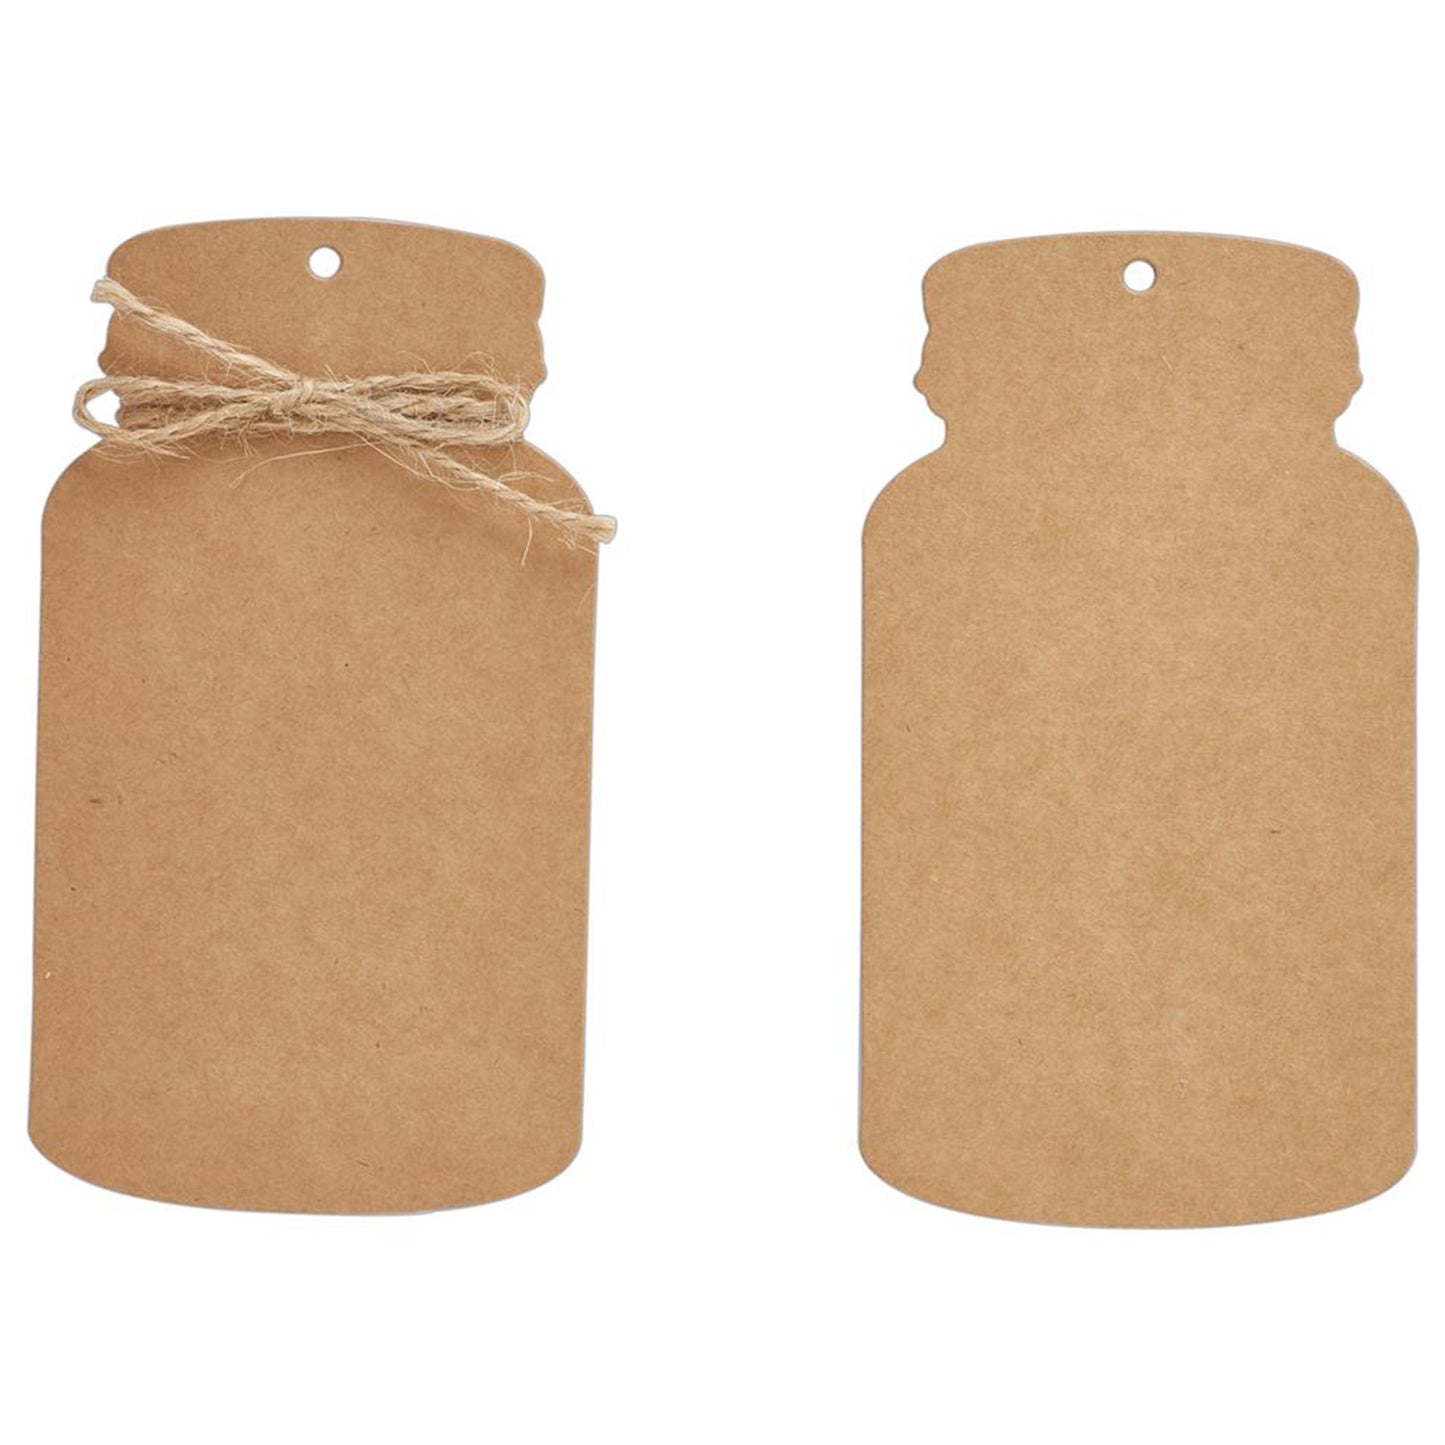 Do Crafts - Gift Tags with String (12pk) - Bare Basics Large Bottle